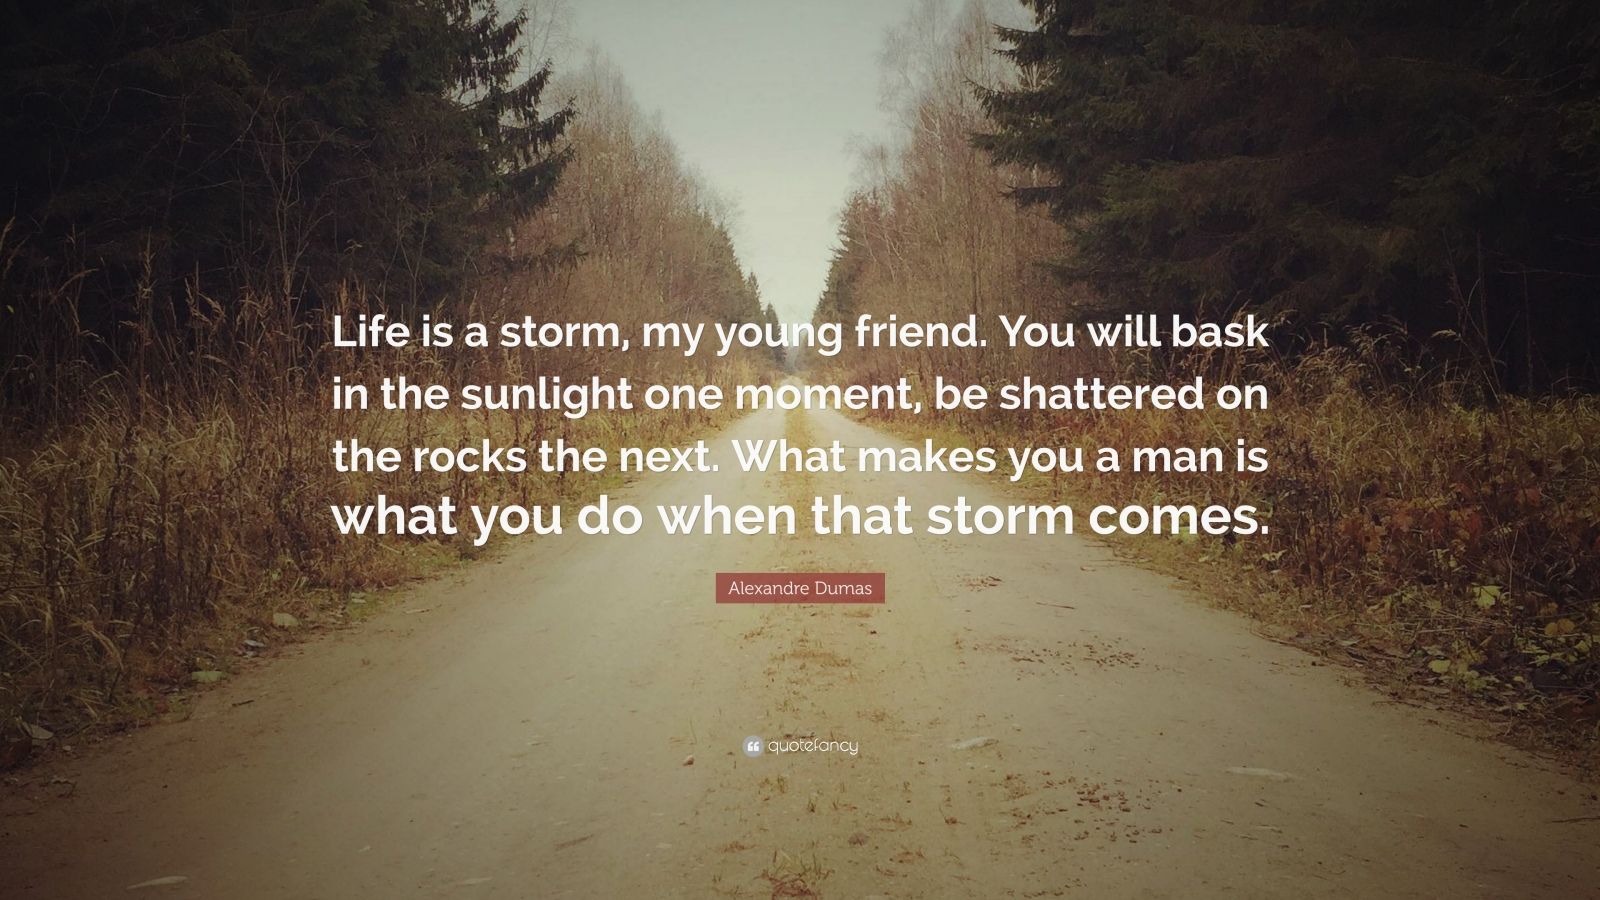 Alexandre Dumas Quote: “Life is a storm, my young friend. You will bask